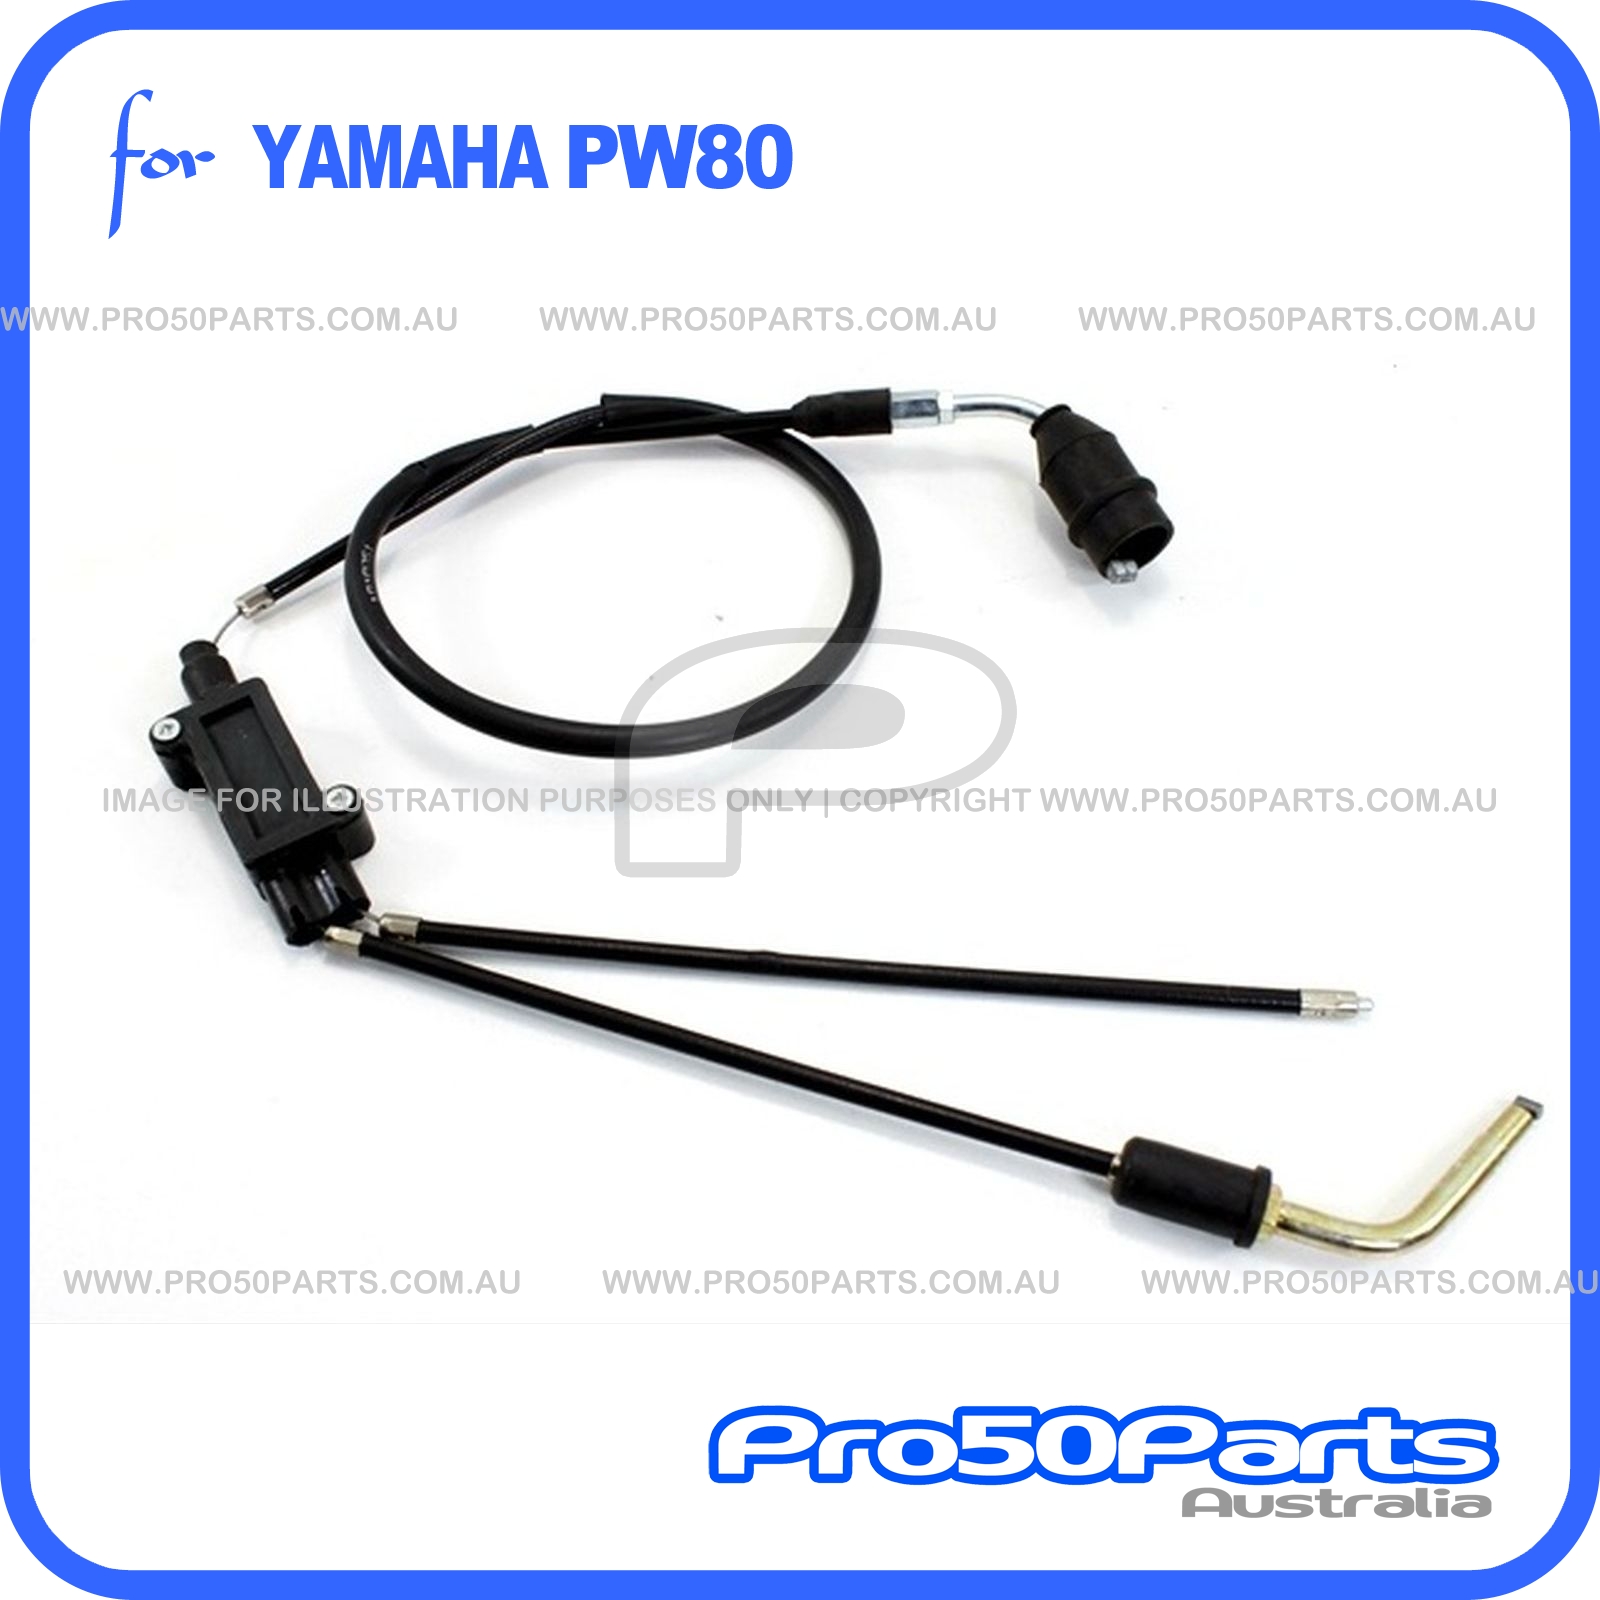 NEW THROTTLE CABLE FIT YAMAHA MOTORCYCLE PW 80 PW80 1991-02 2003 21W-26311-02-00 